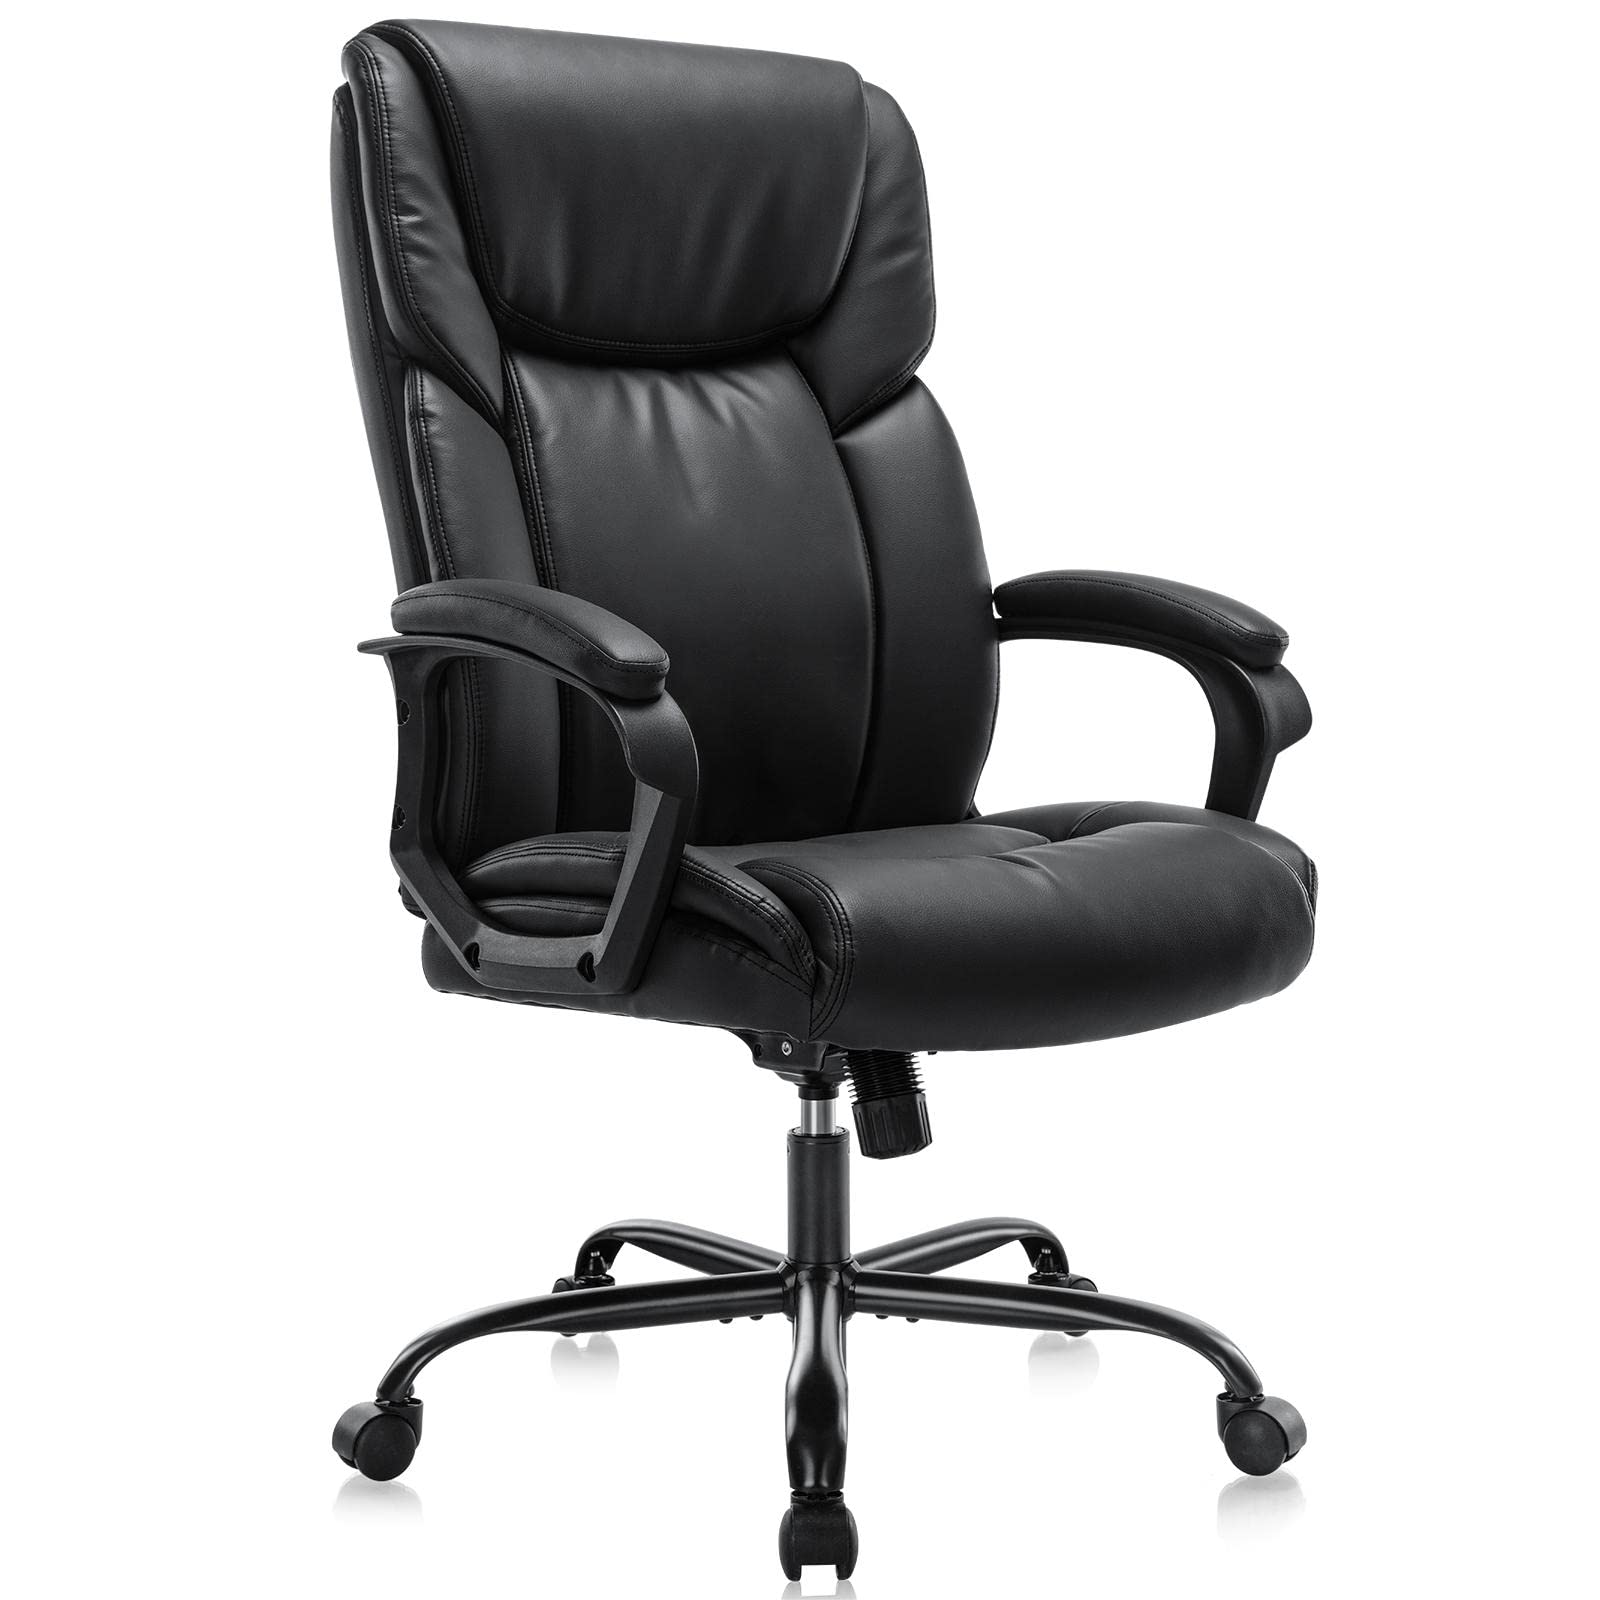 Executive Office Chair - Ergonomic Home Computer Desk Chair for Heavy People with Wheel, Lumbar Support, PU Leather, Adjustable Height & Swivel Modern Classic Black, Now Only $63.56